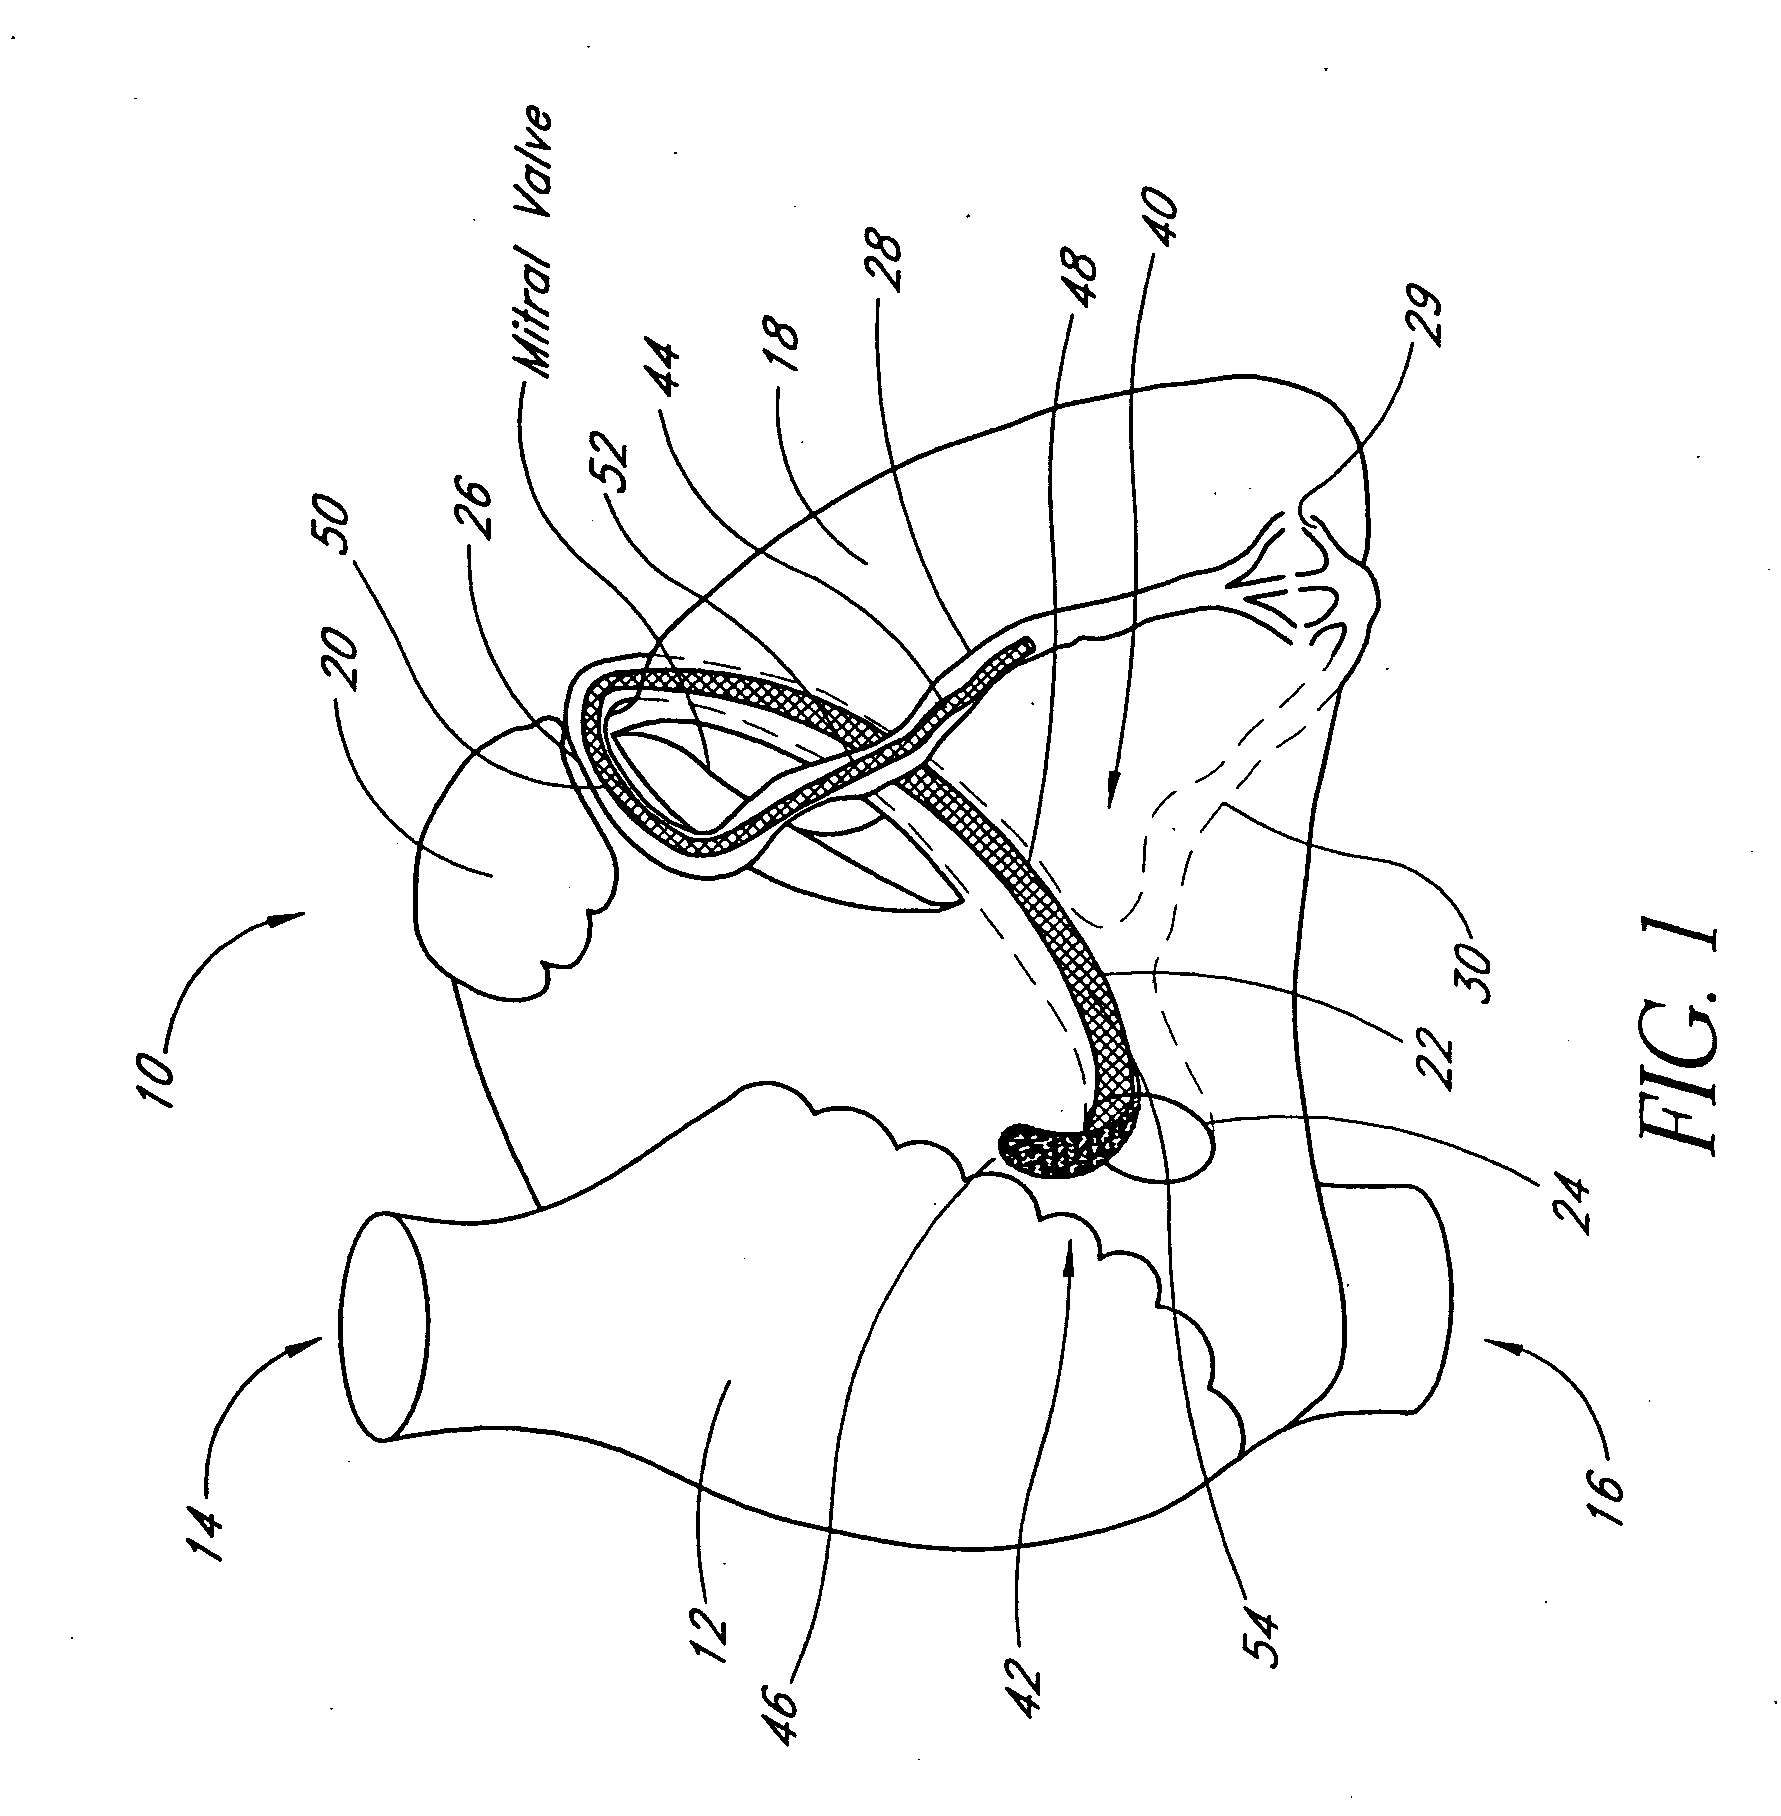 Methods and apparatus for remodeling an extravascular tissue structure